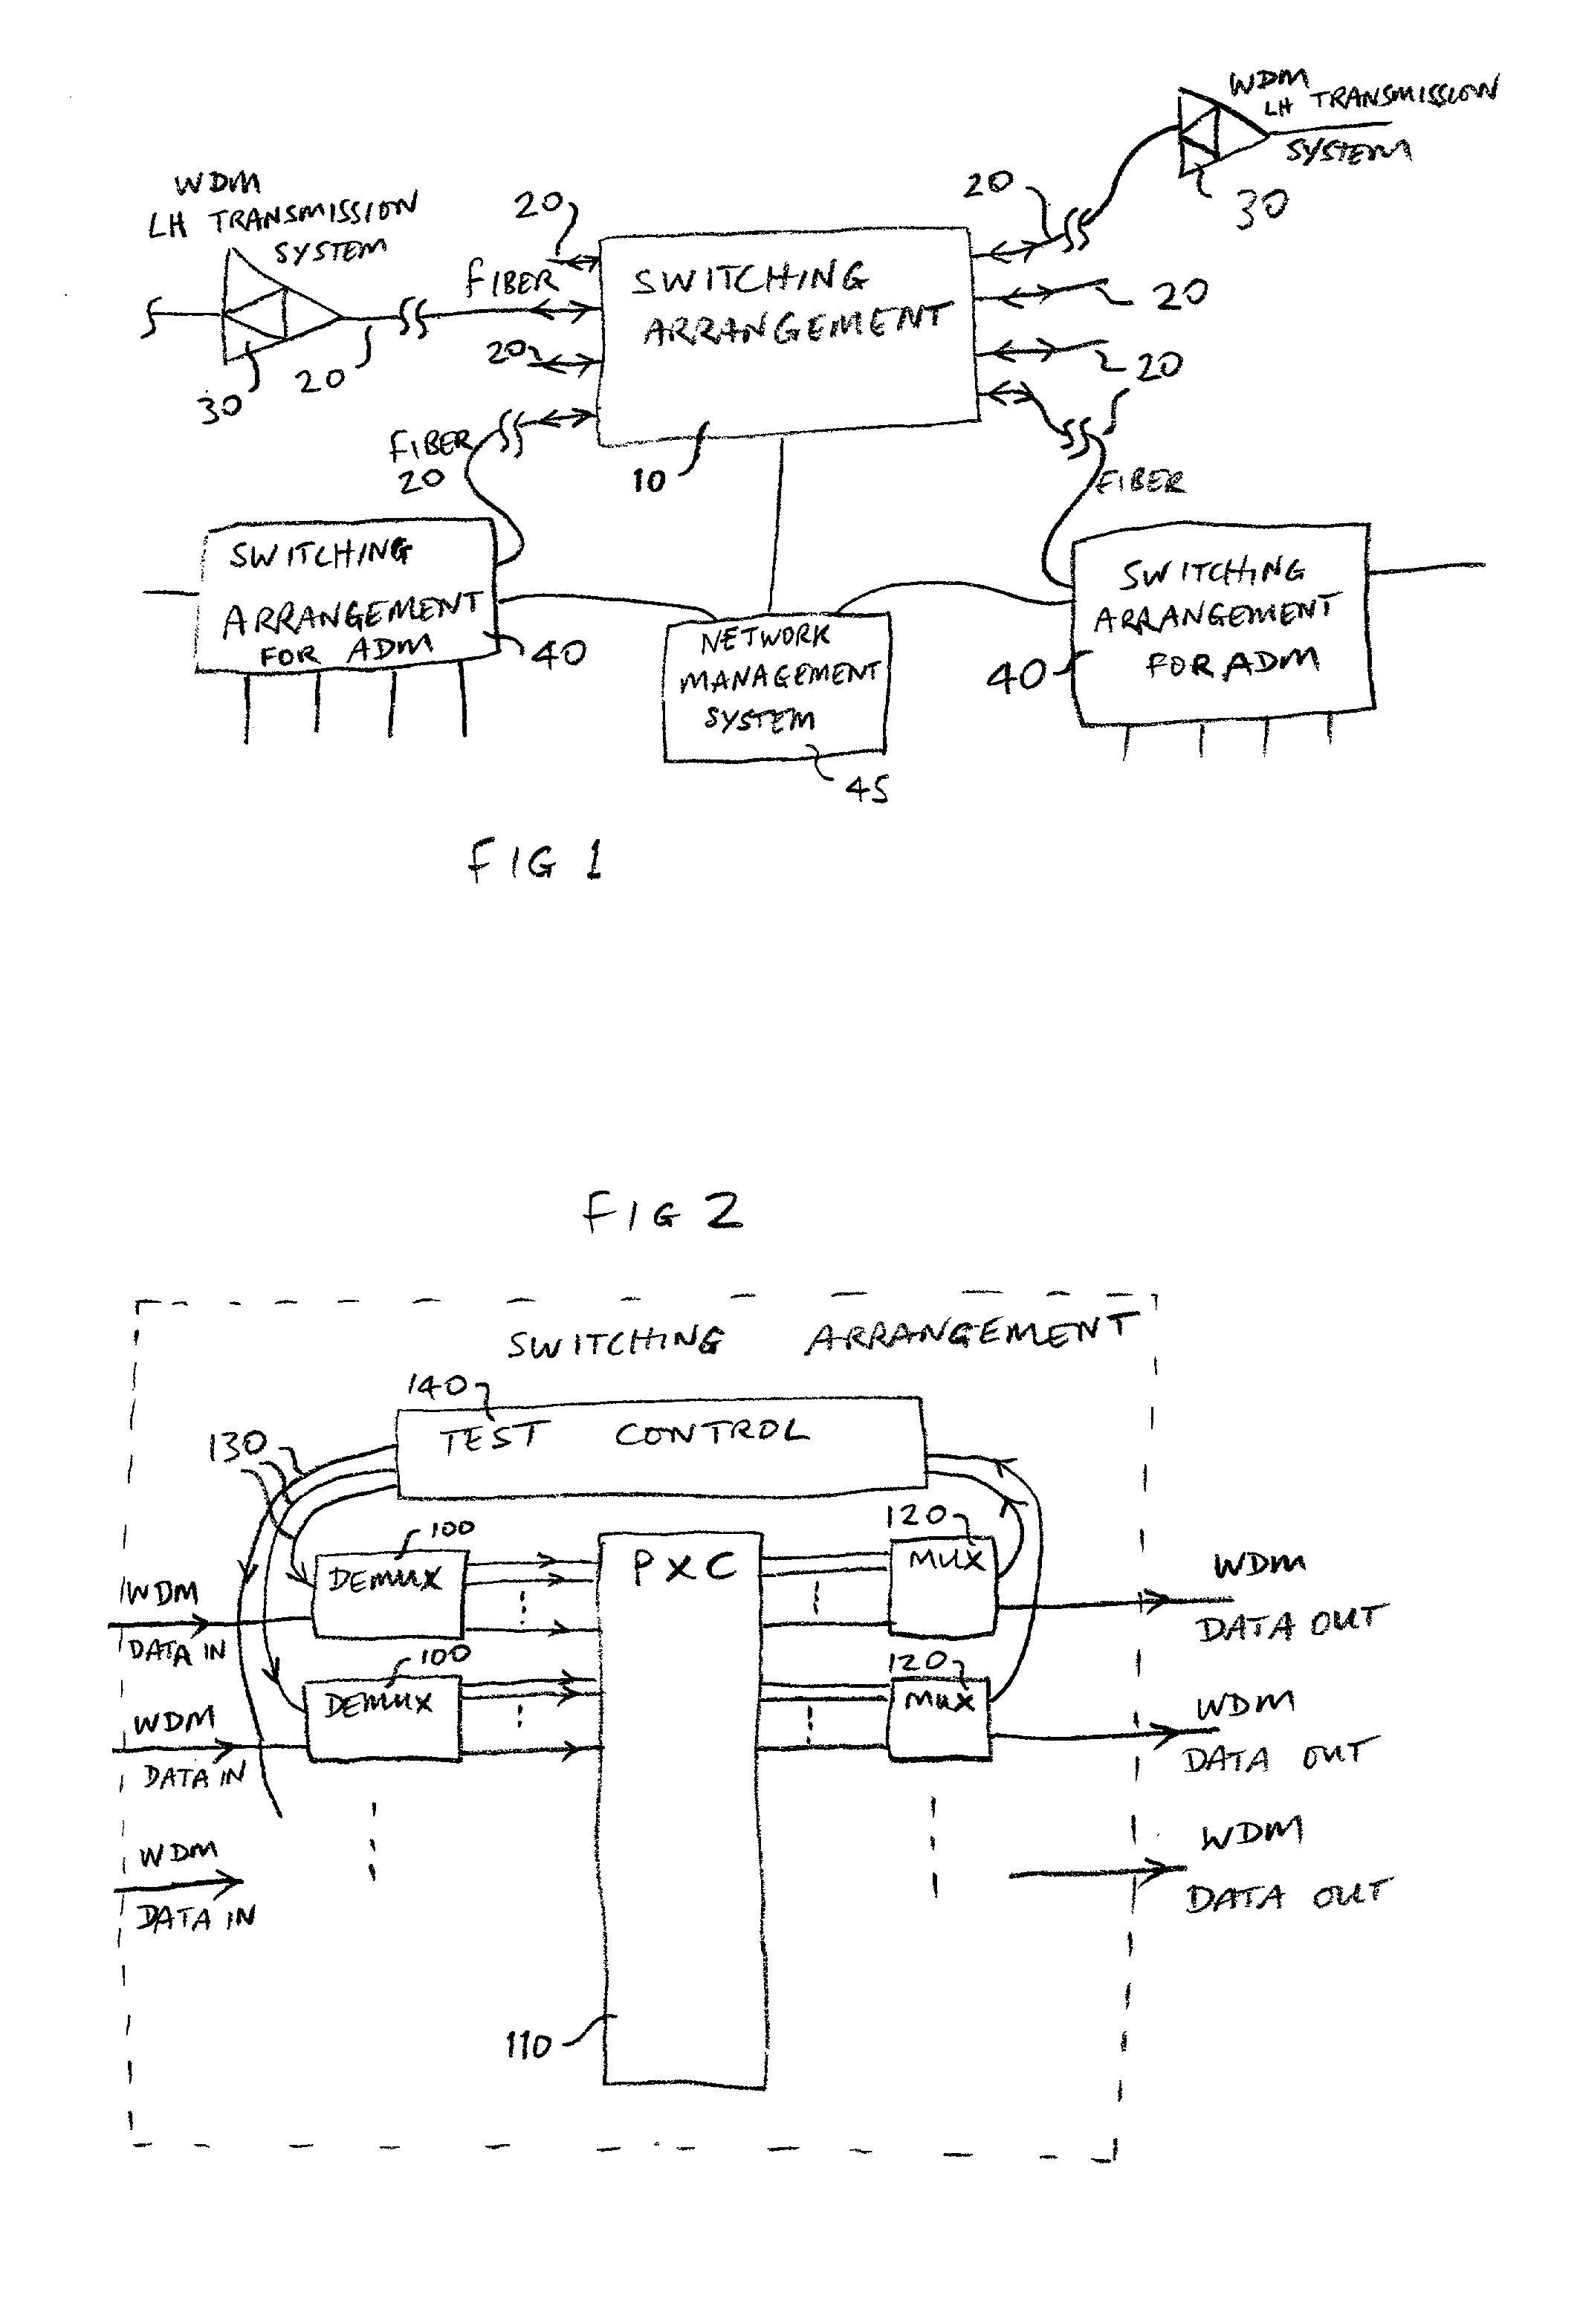 Connection verification and monitoring in optical wavelength multiplexed communications systems